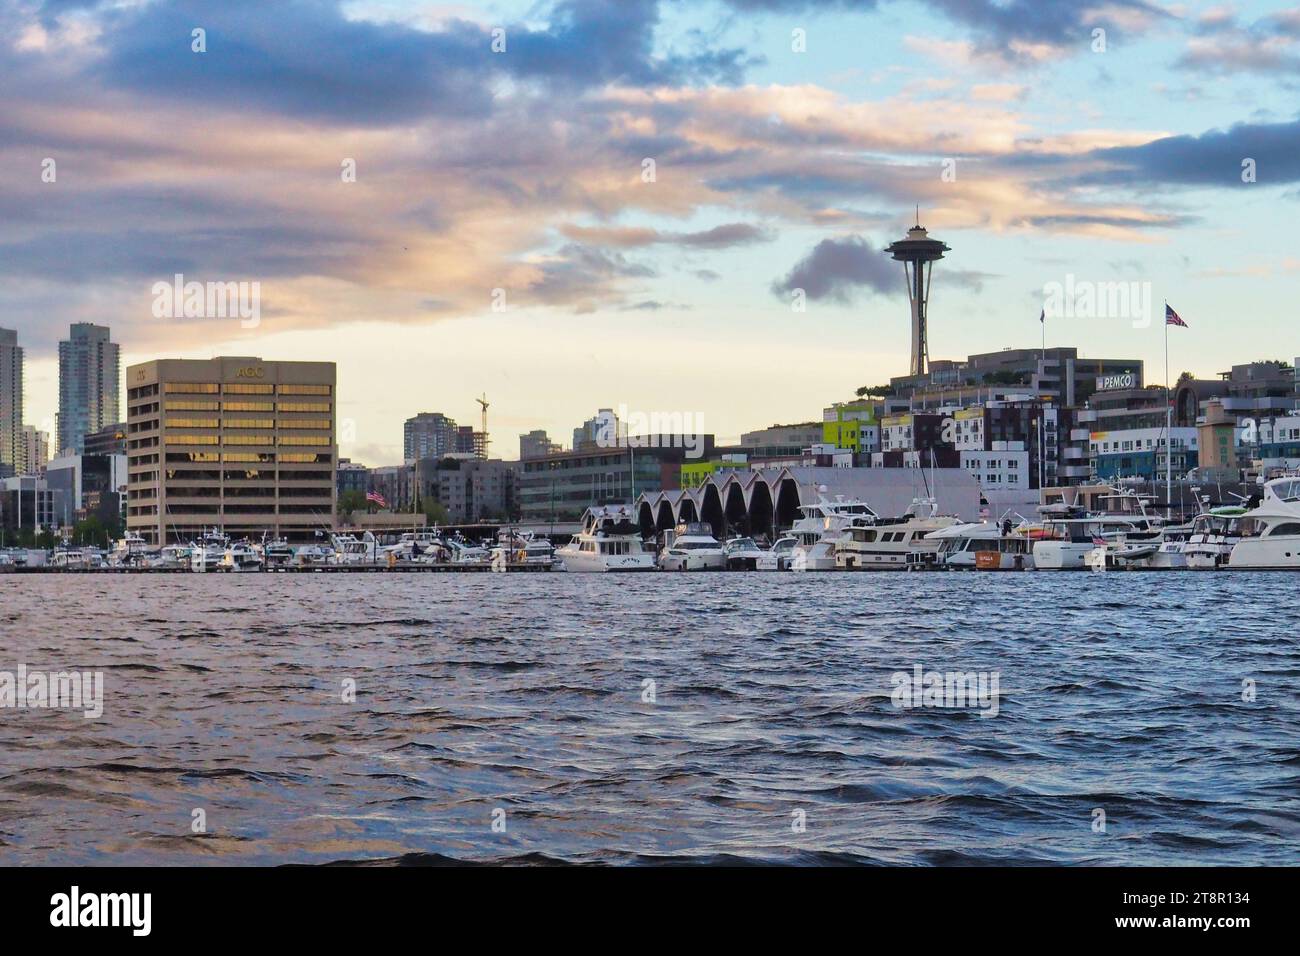 A view of Seattle's Space Needle and South Lake Union neighborhood from the water on Lake Union. City downtown with dramatic sky and clouds at sunset. Stock Photo